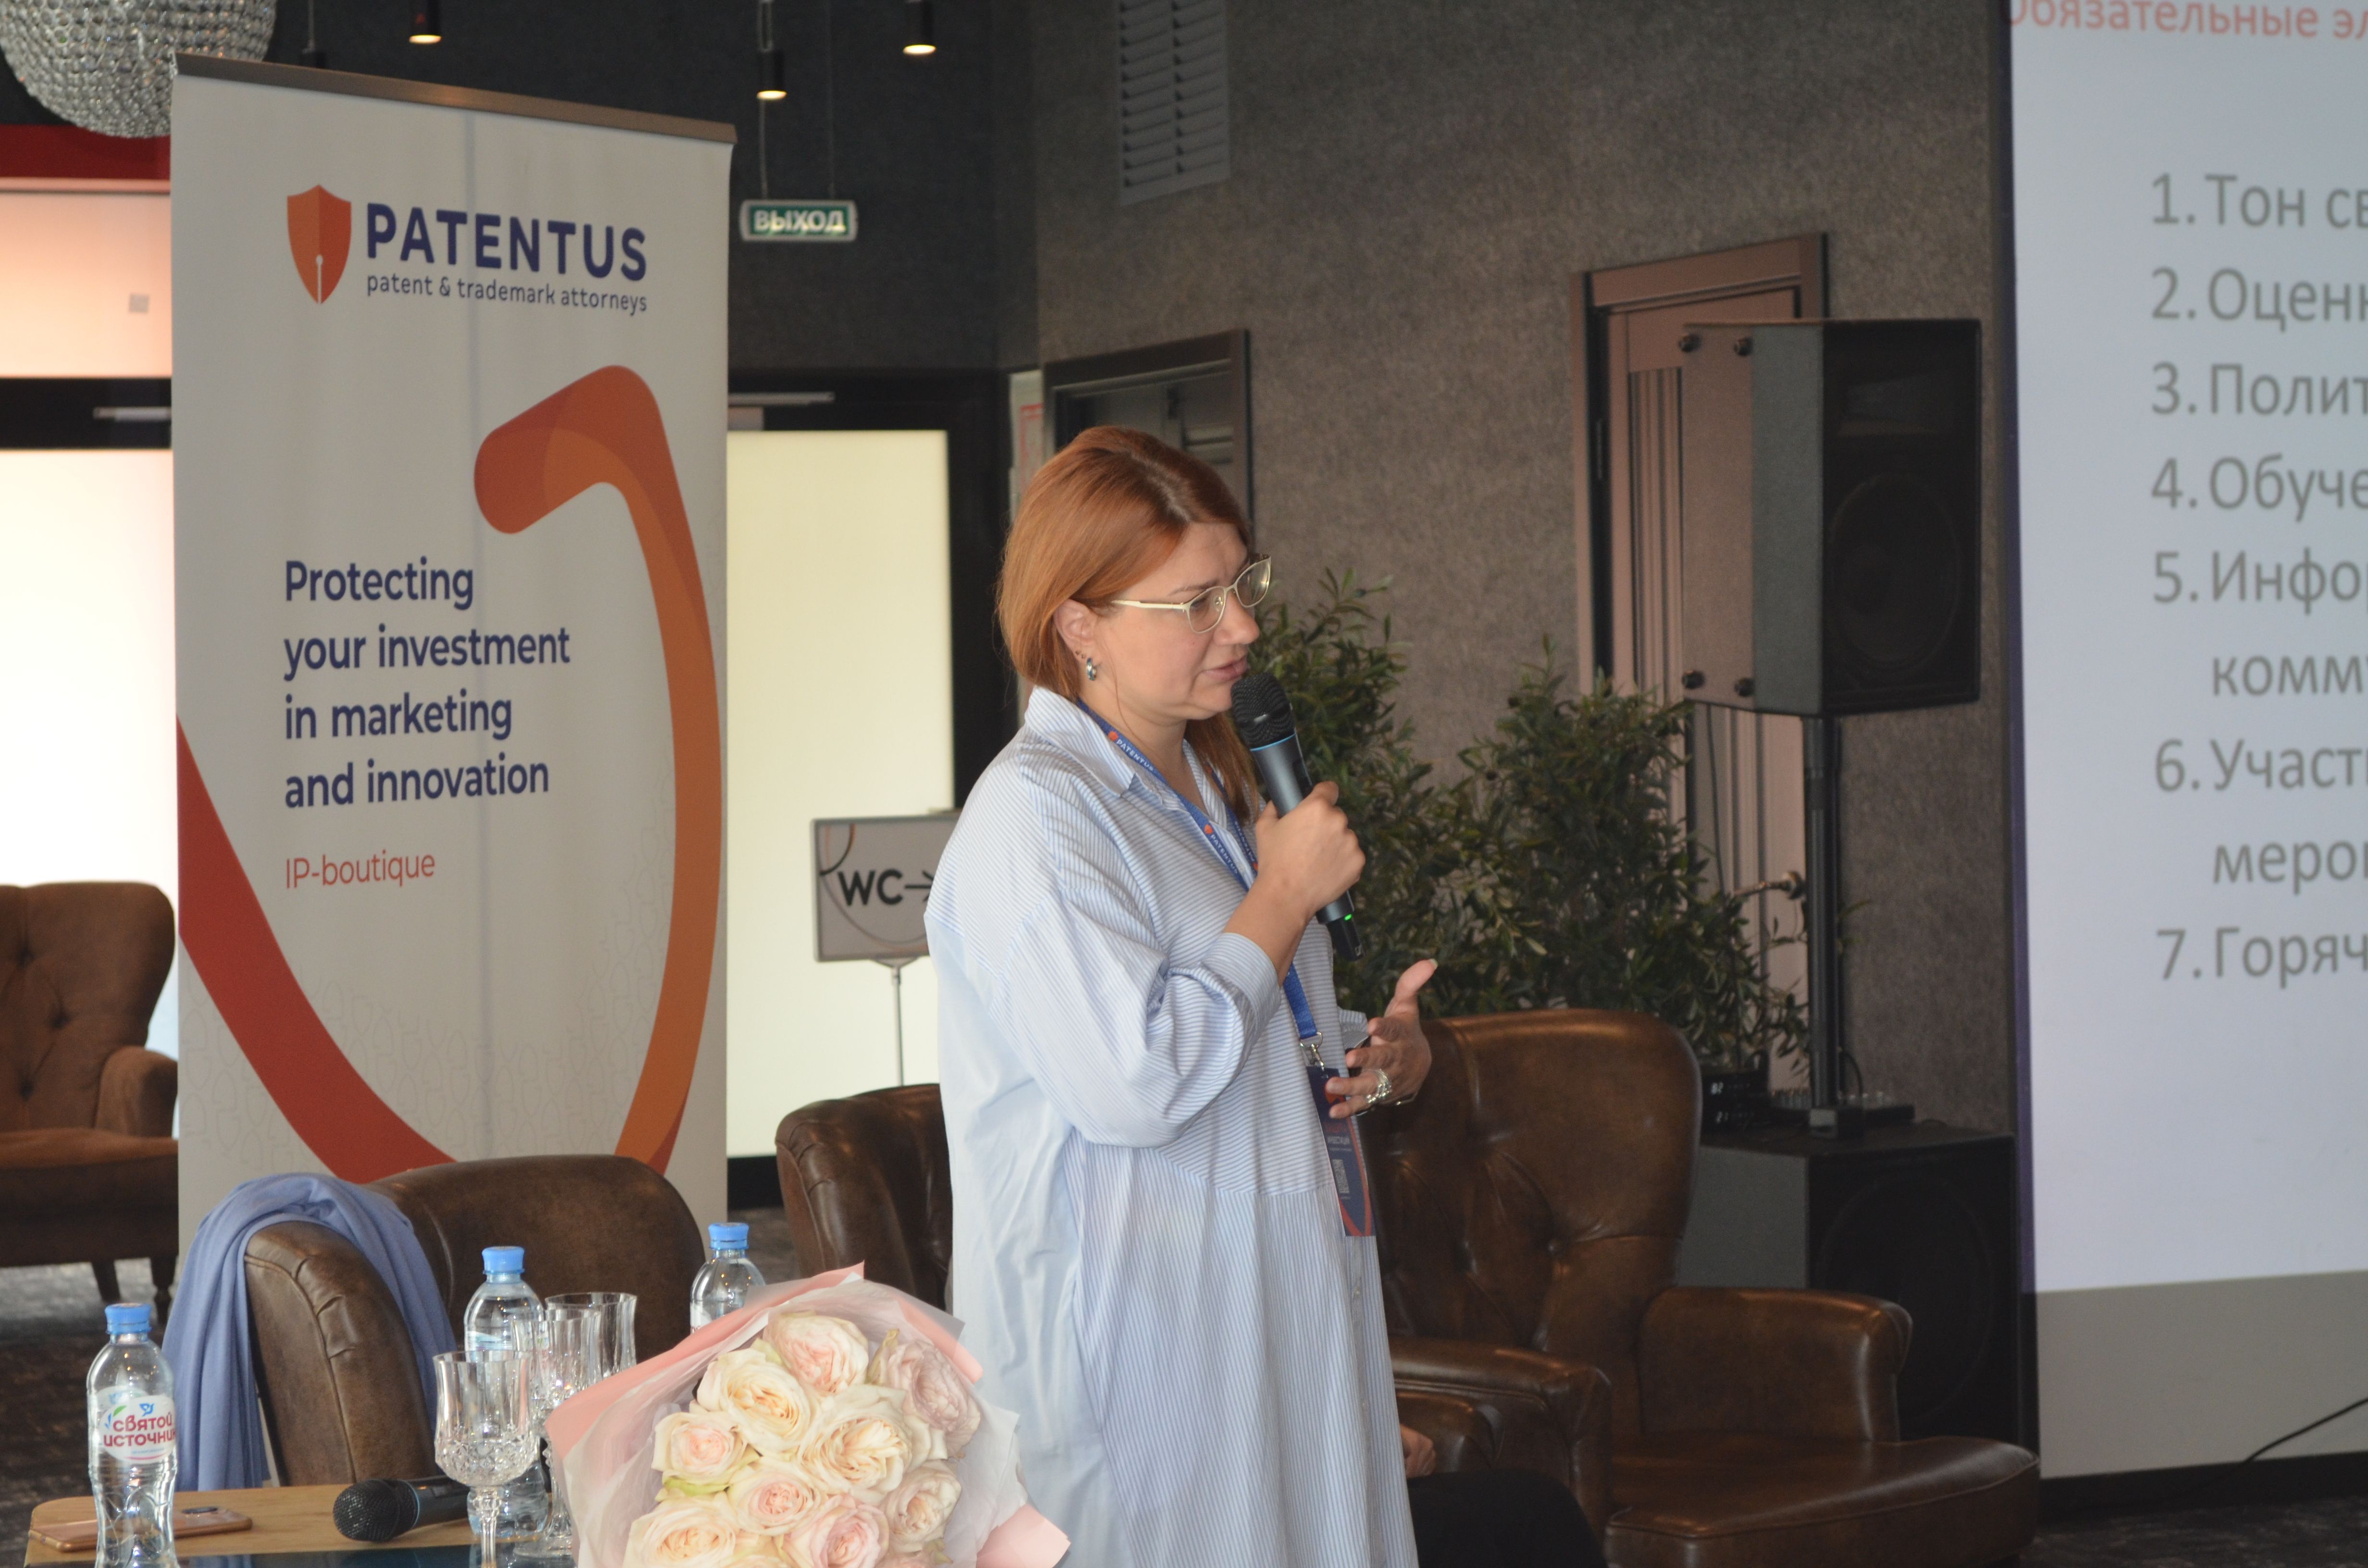 PATENTUS held a unique business breakfast on IP Compliance